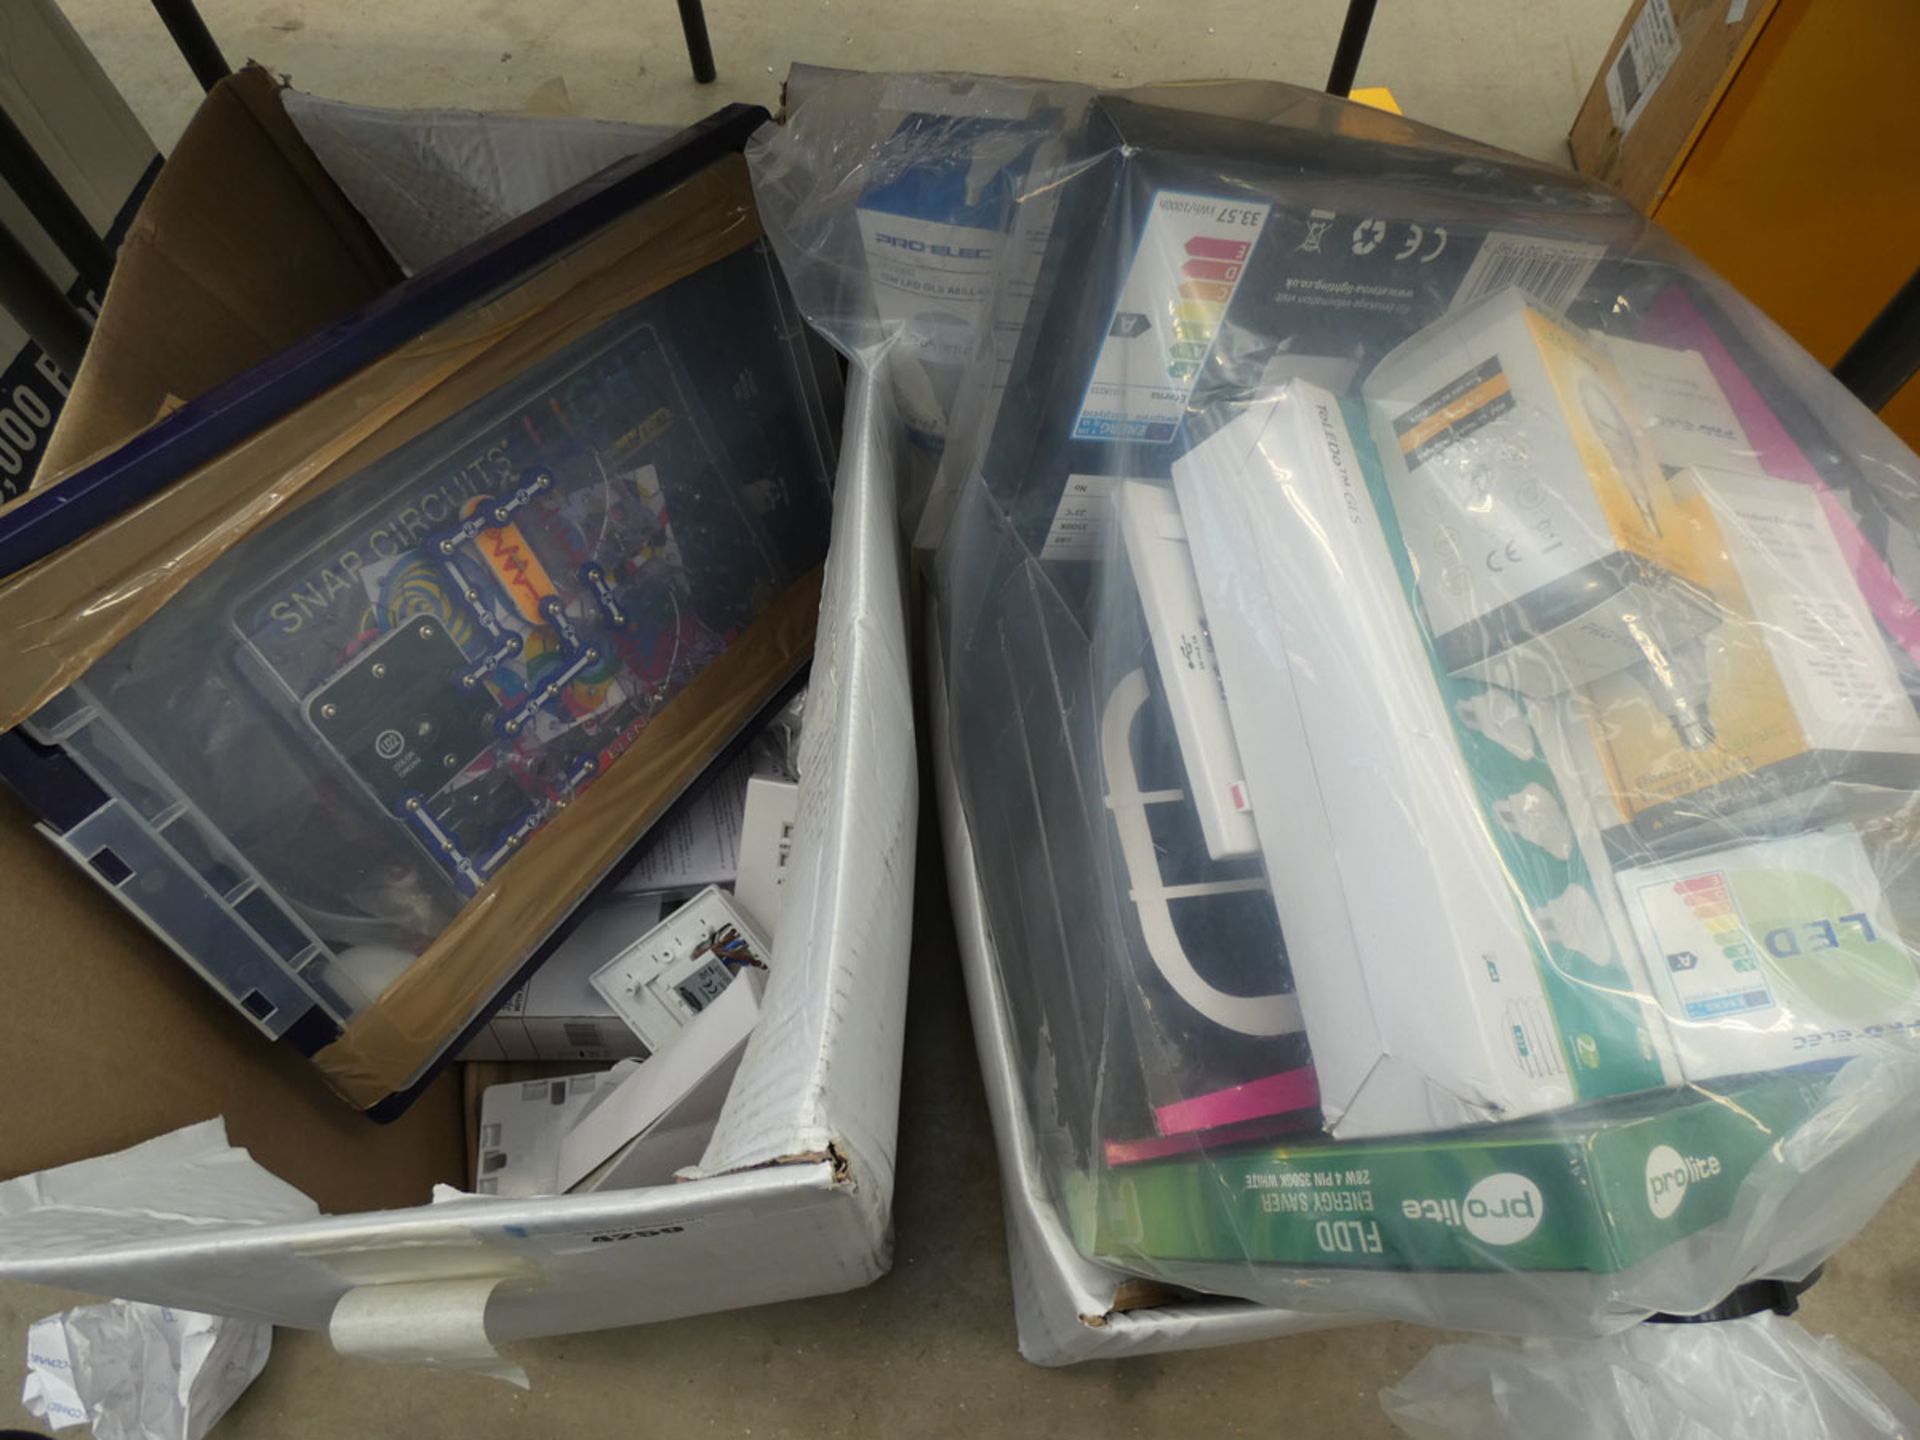 2 boxes containing bulbs, switches, sockets, snap circuits etc.